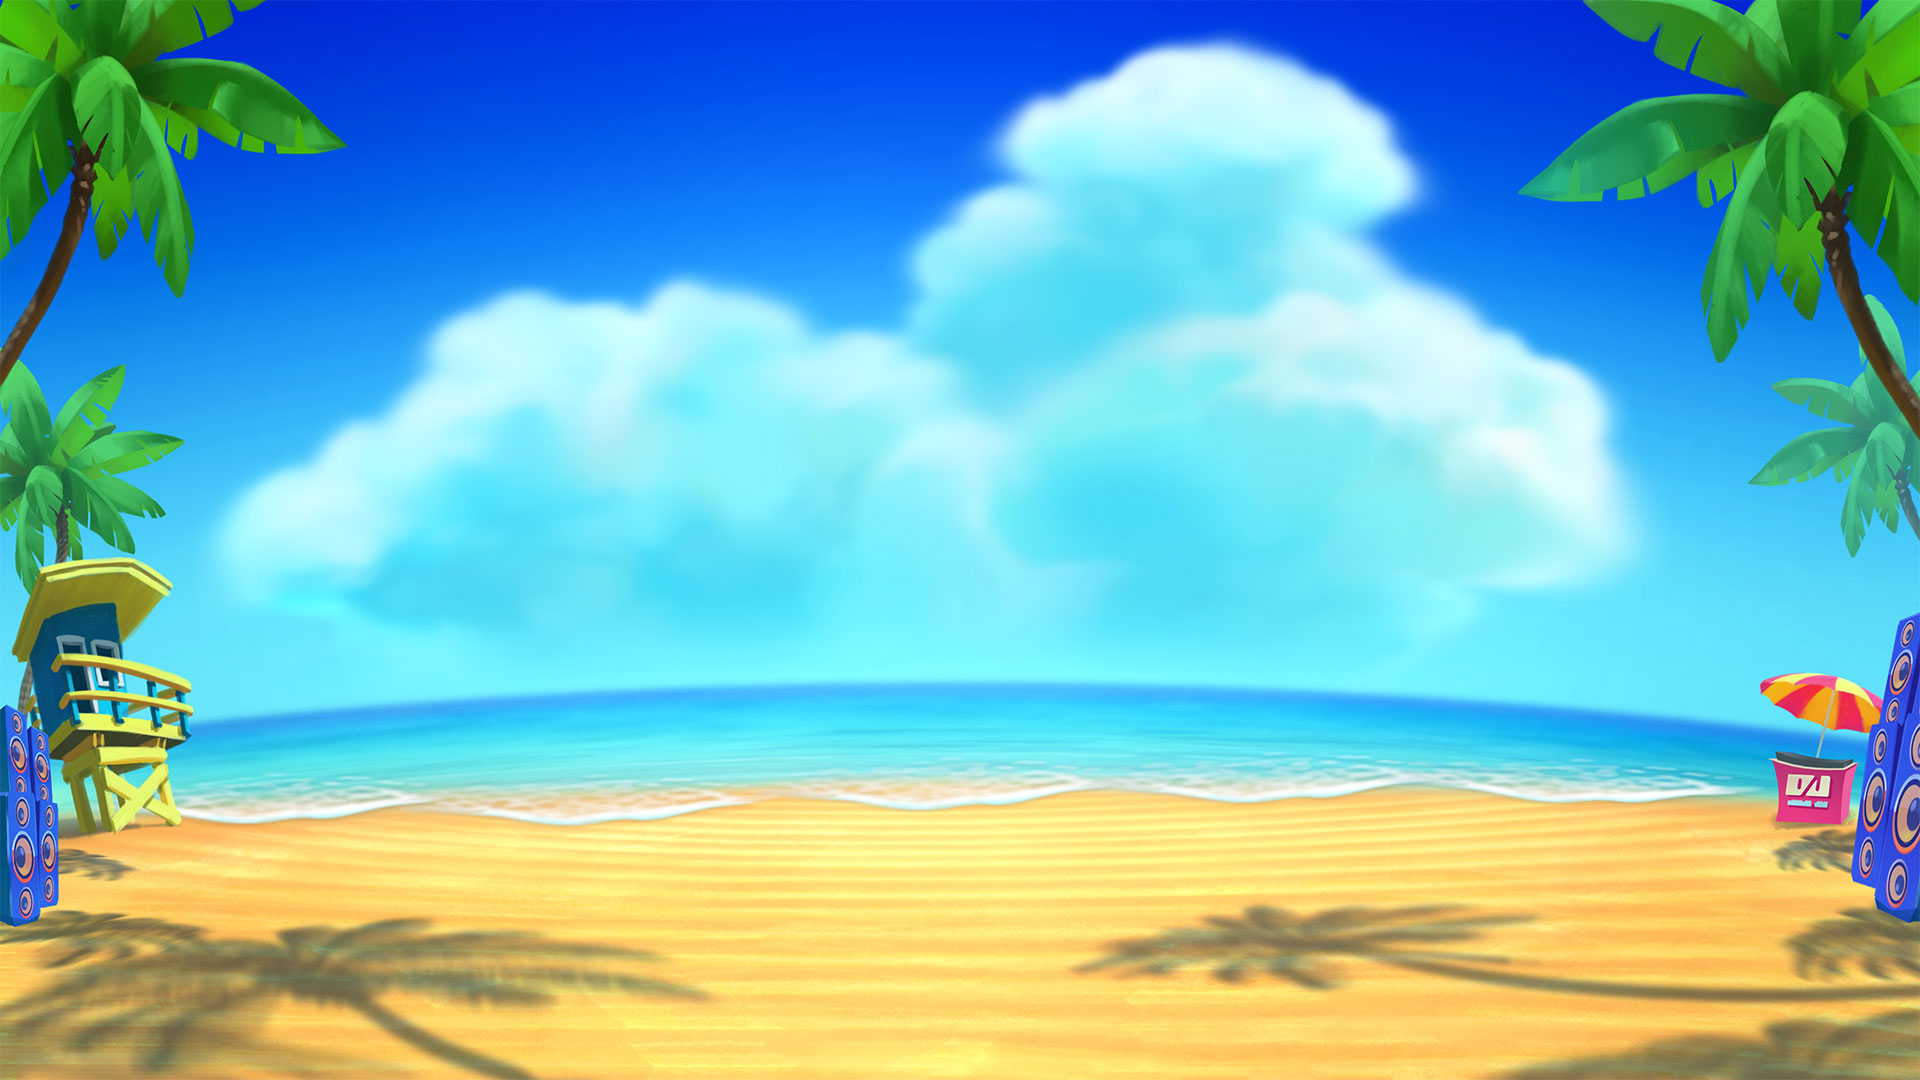 Game hight resolution background Spinions Beach Party